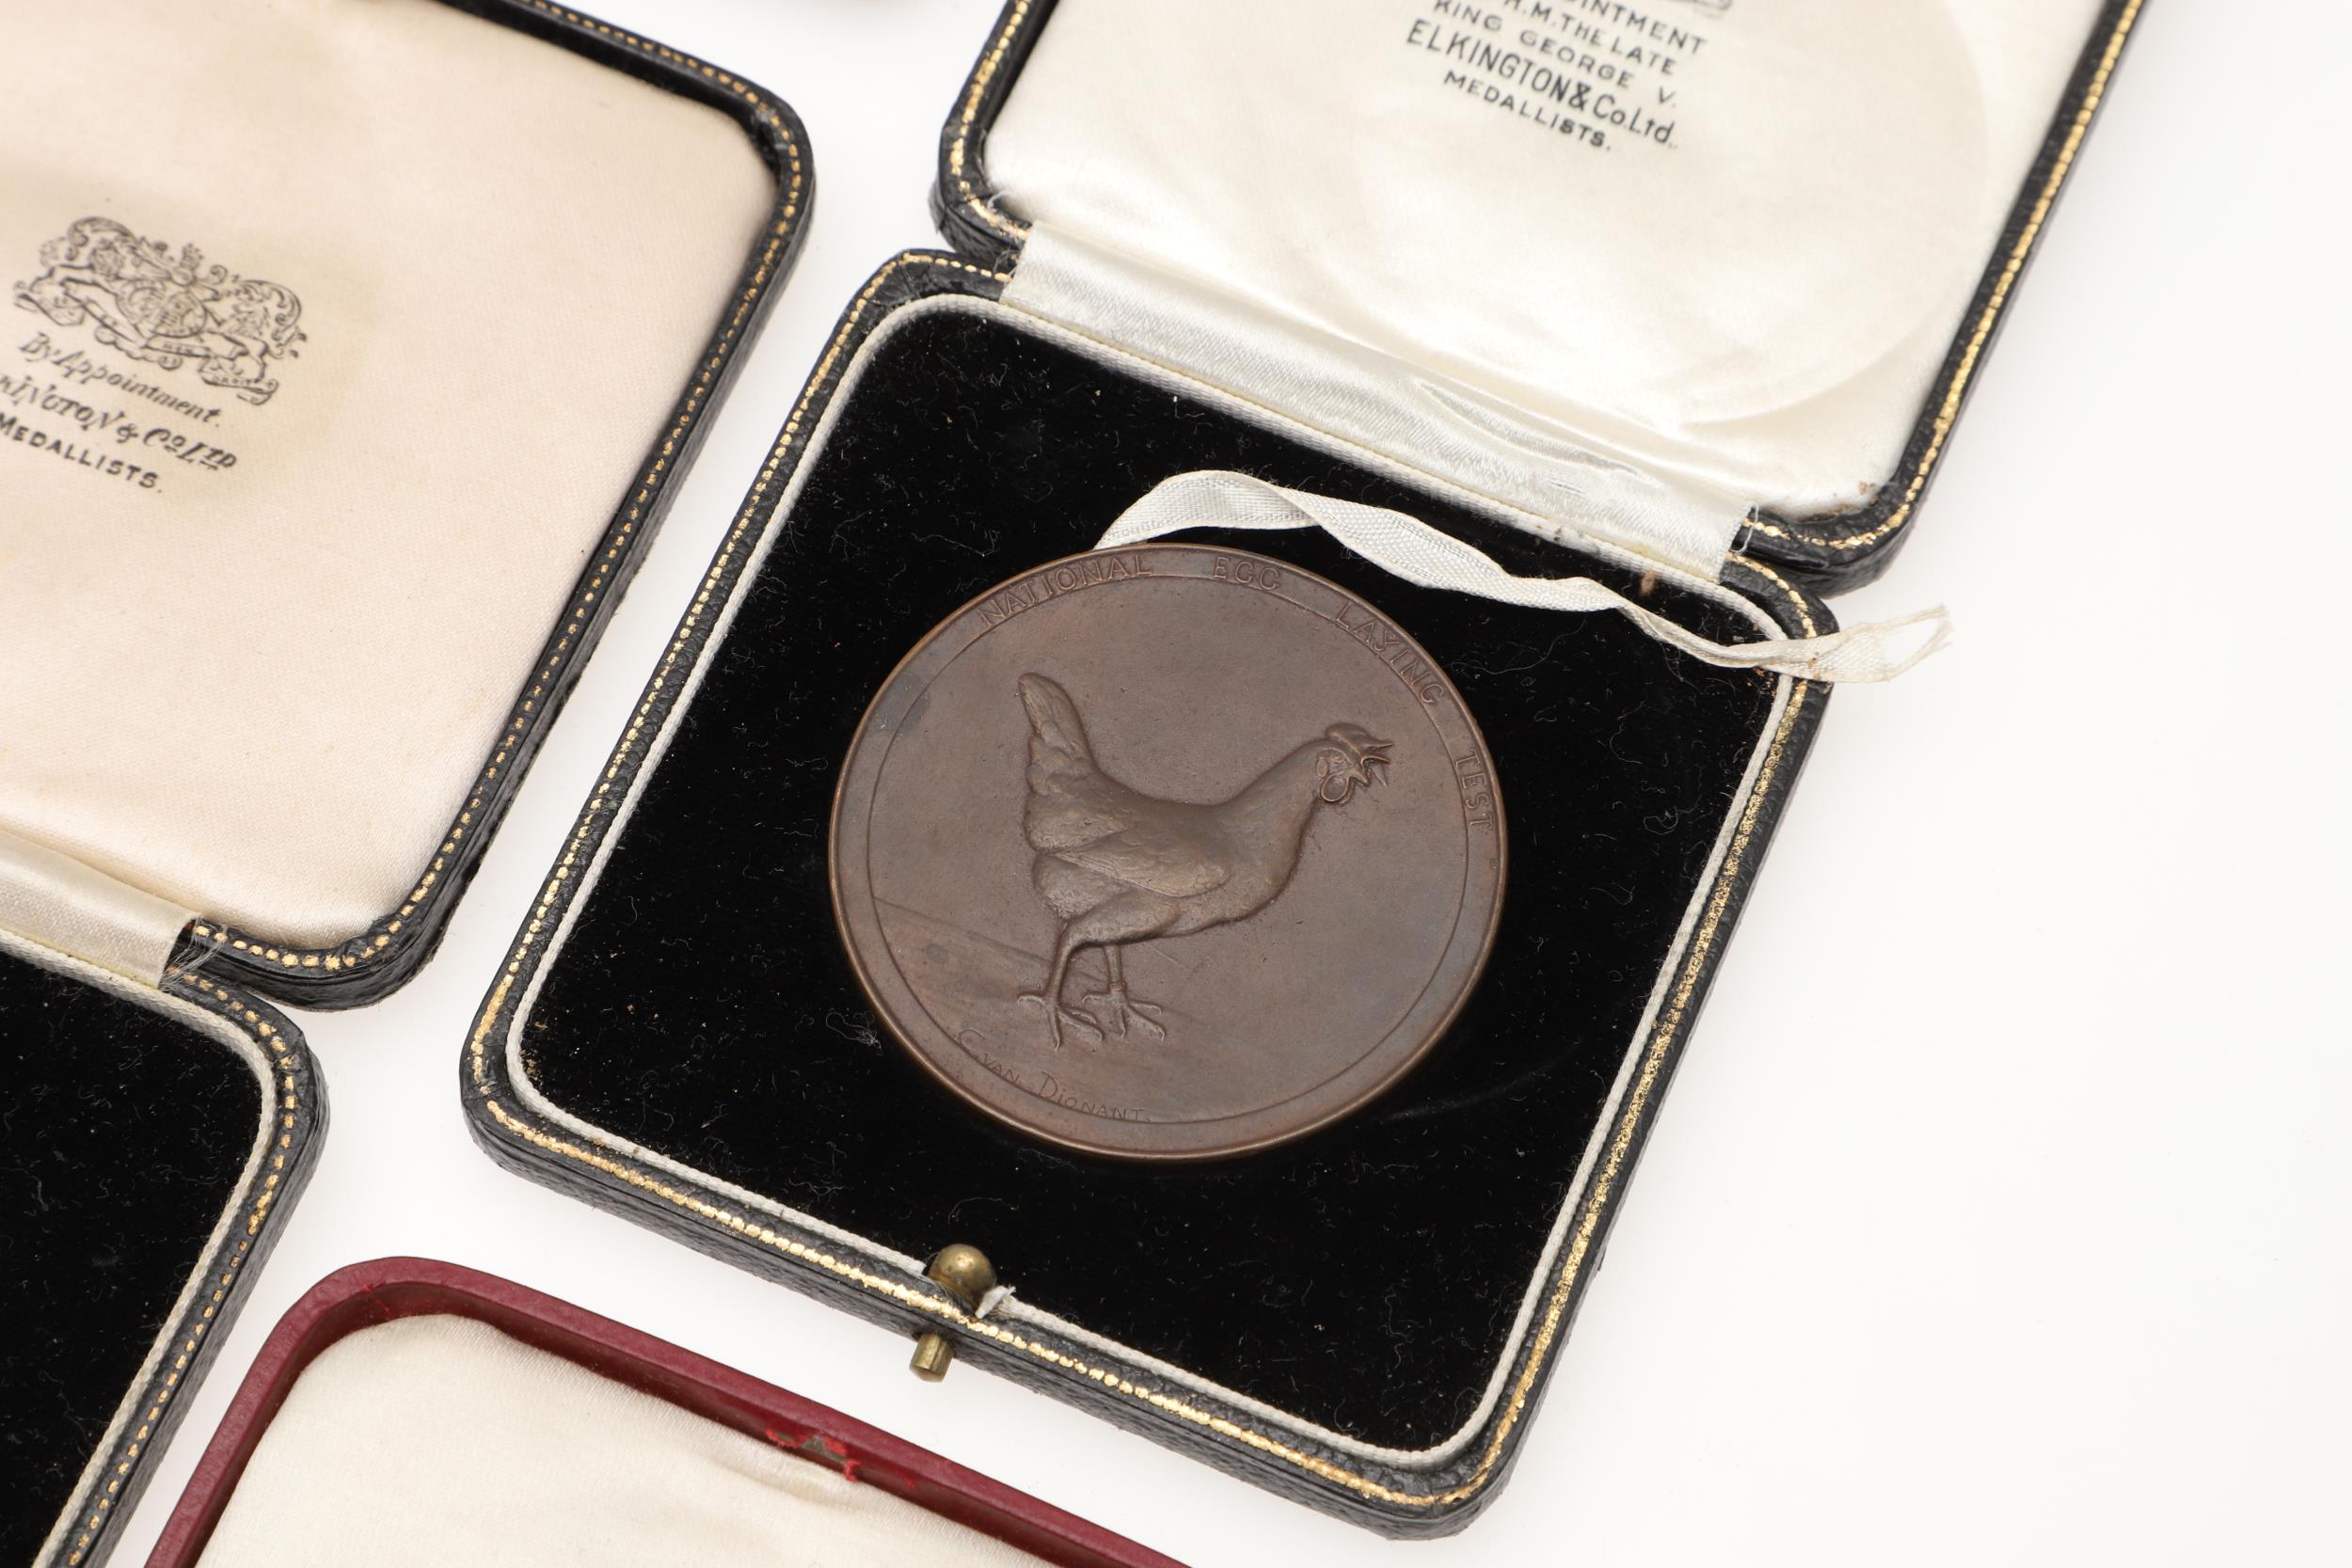 AN EXTENSIVE COLLECTION OF GOLD, SILVER AND BRONZE MEDALS FOR EGG LAYING. - Image 9 of 23